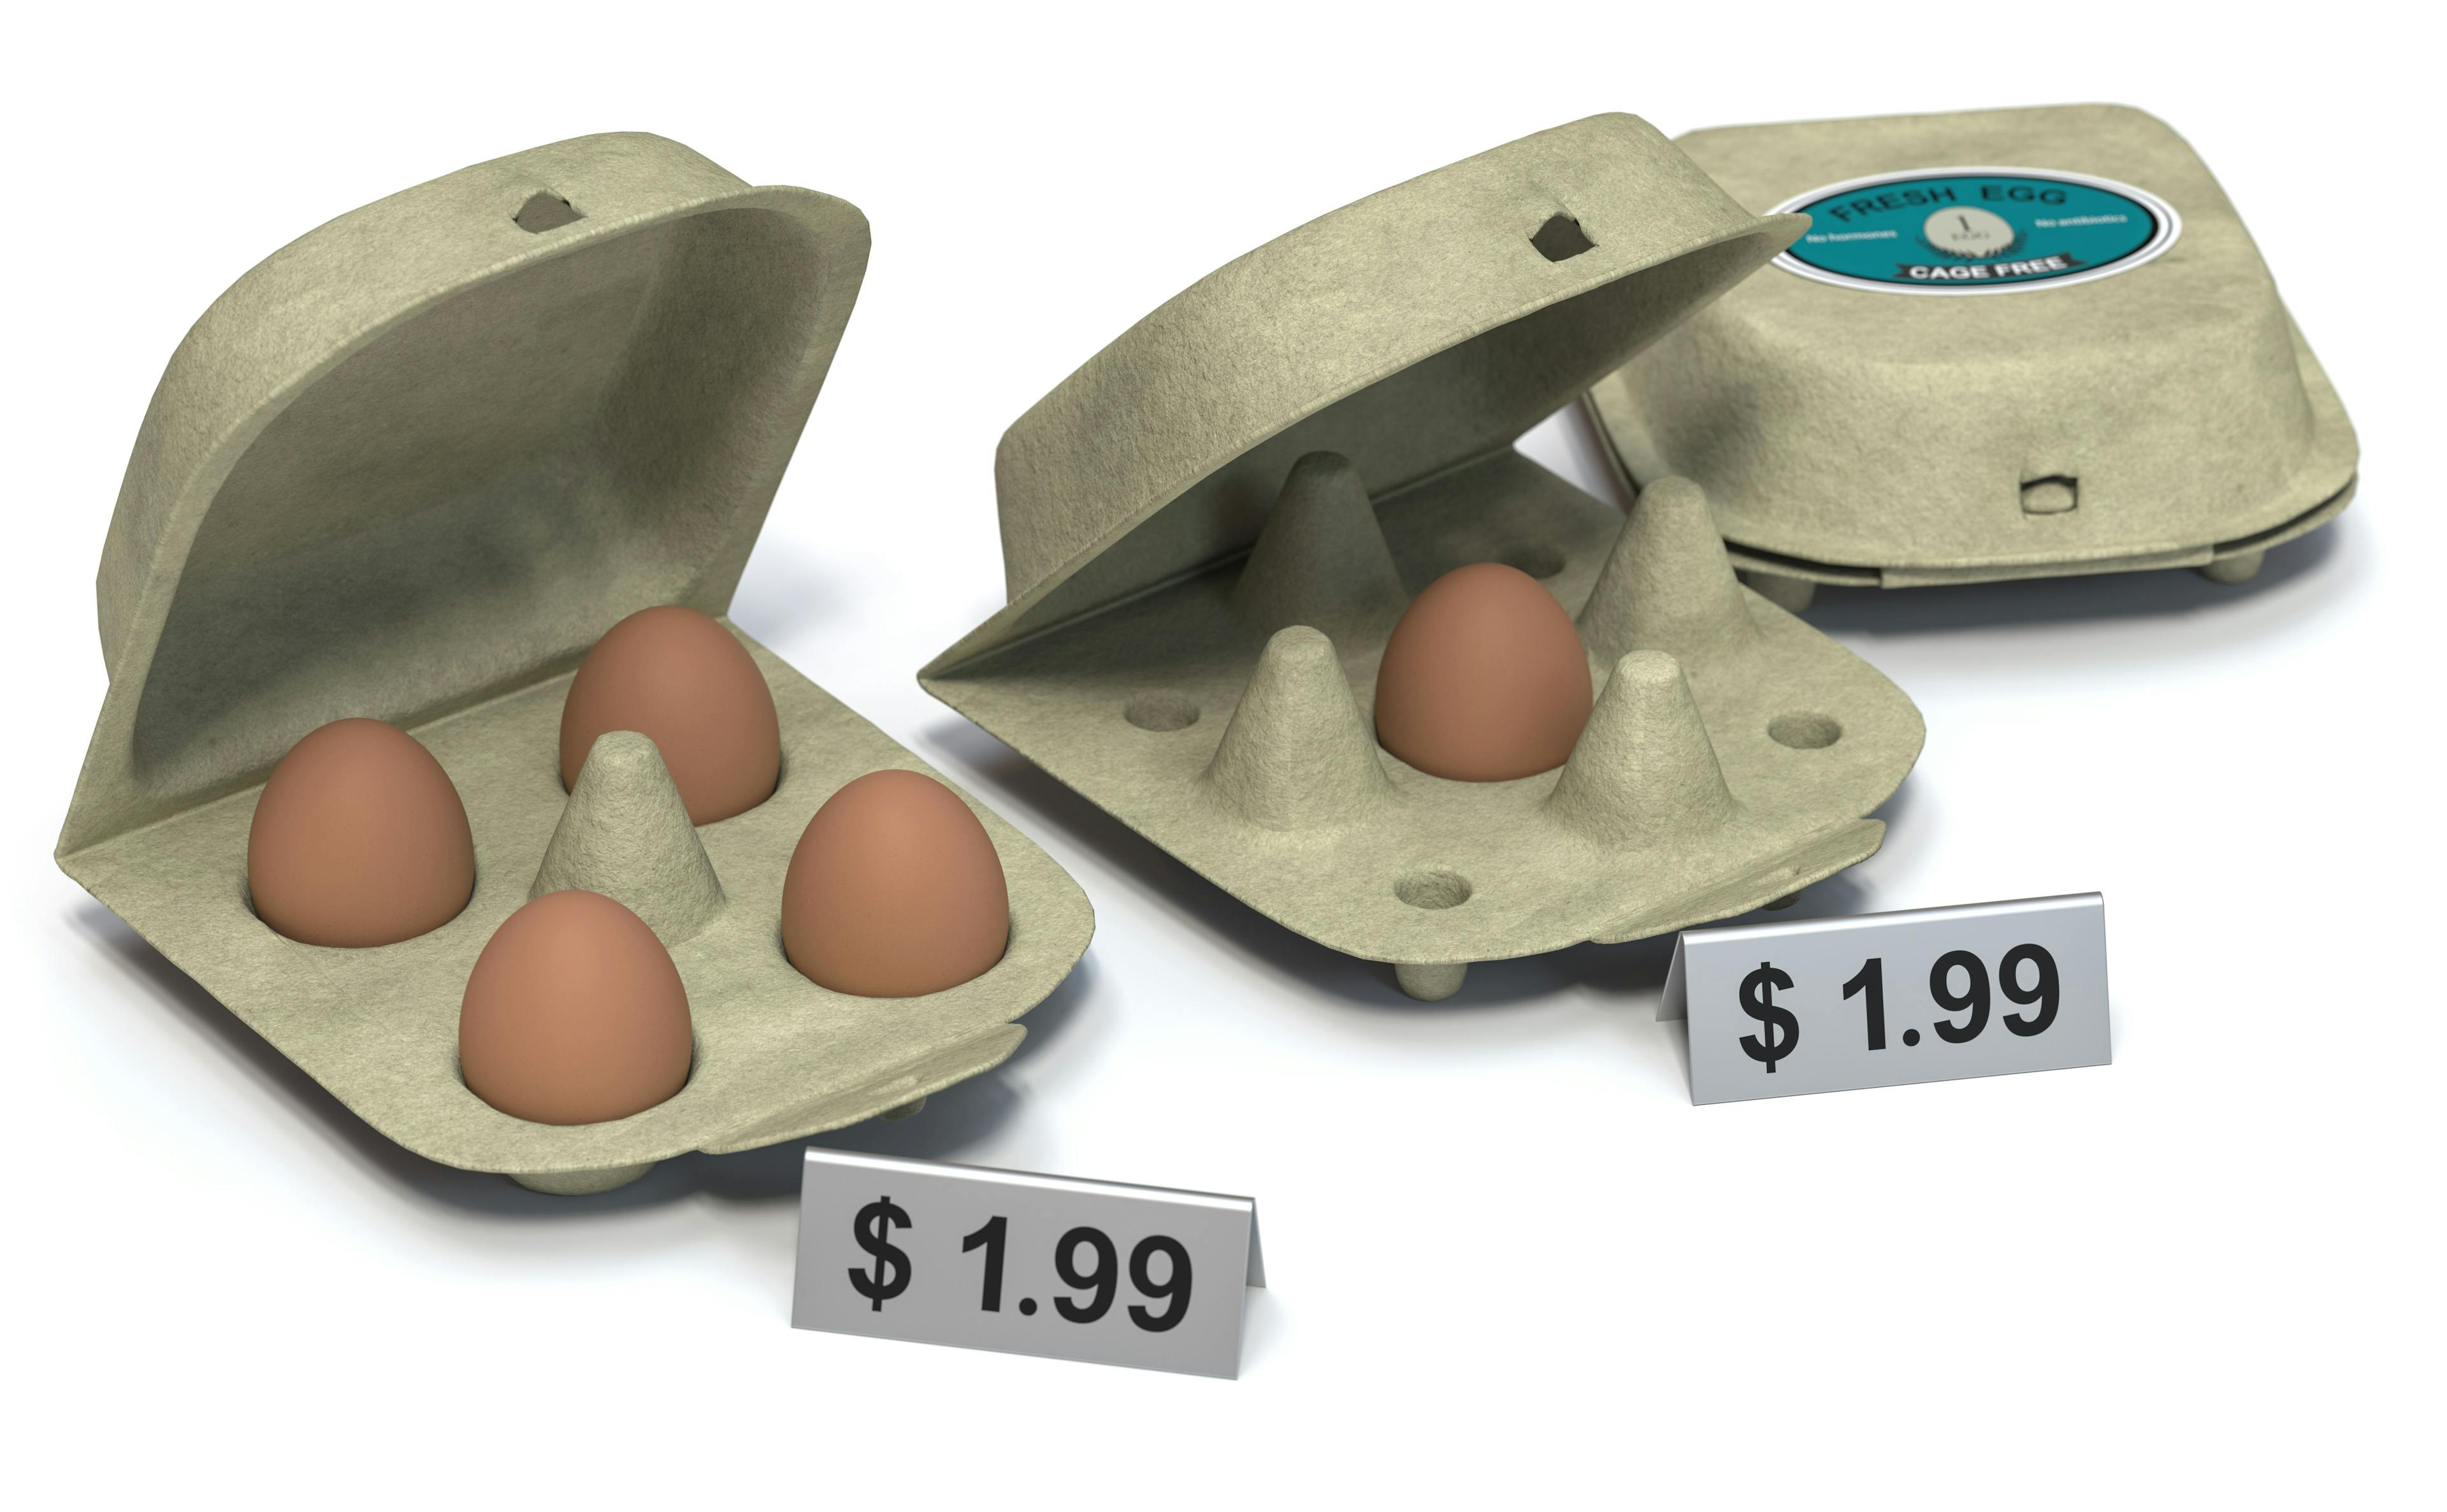 A shrinkflation photo-illustration. A carton of eggs with four eggs beside a carton with one egg, both with the price of $1.99.